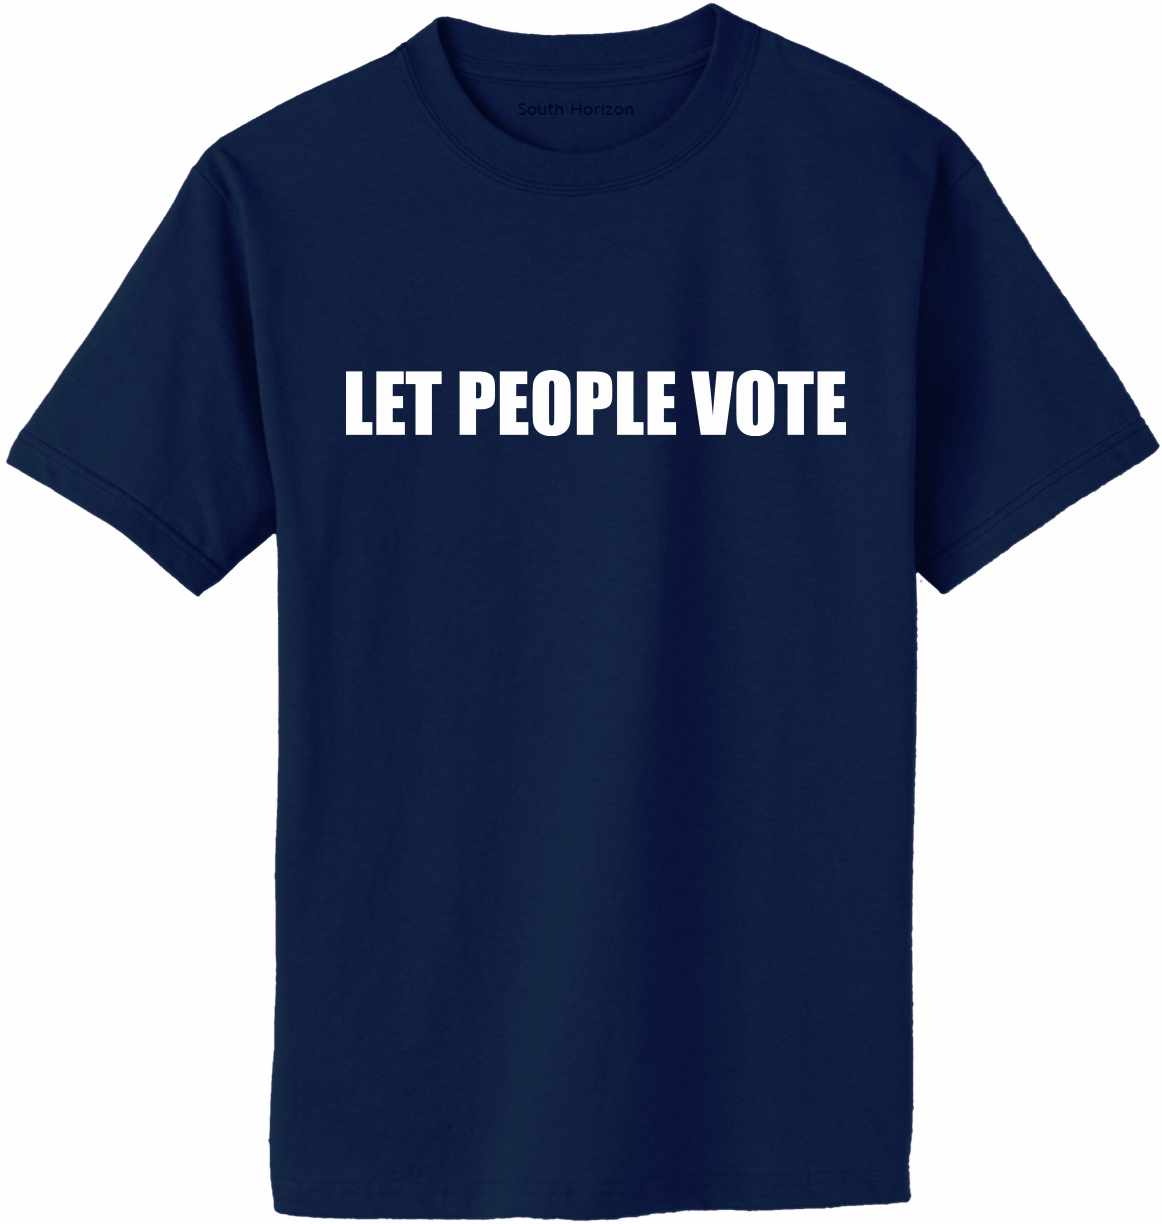 Let People Vote on Adult T-Shirt